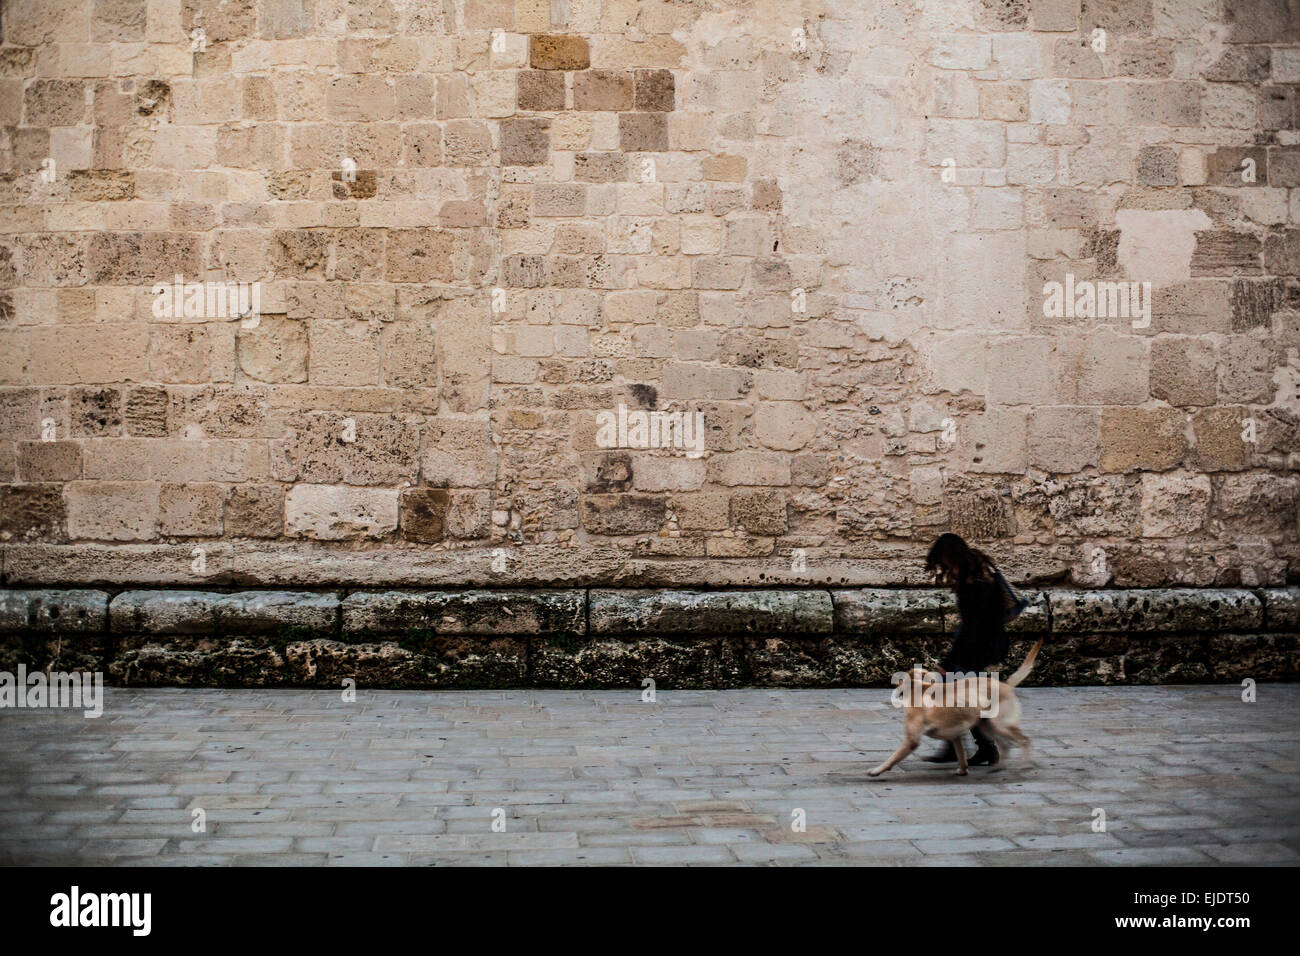 Woman walking her dog in a European city Stock Photo